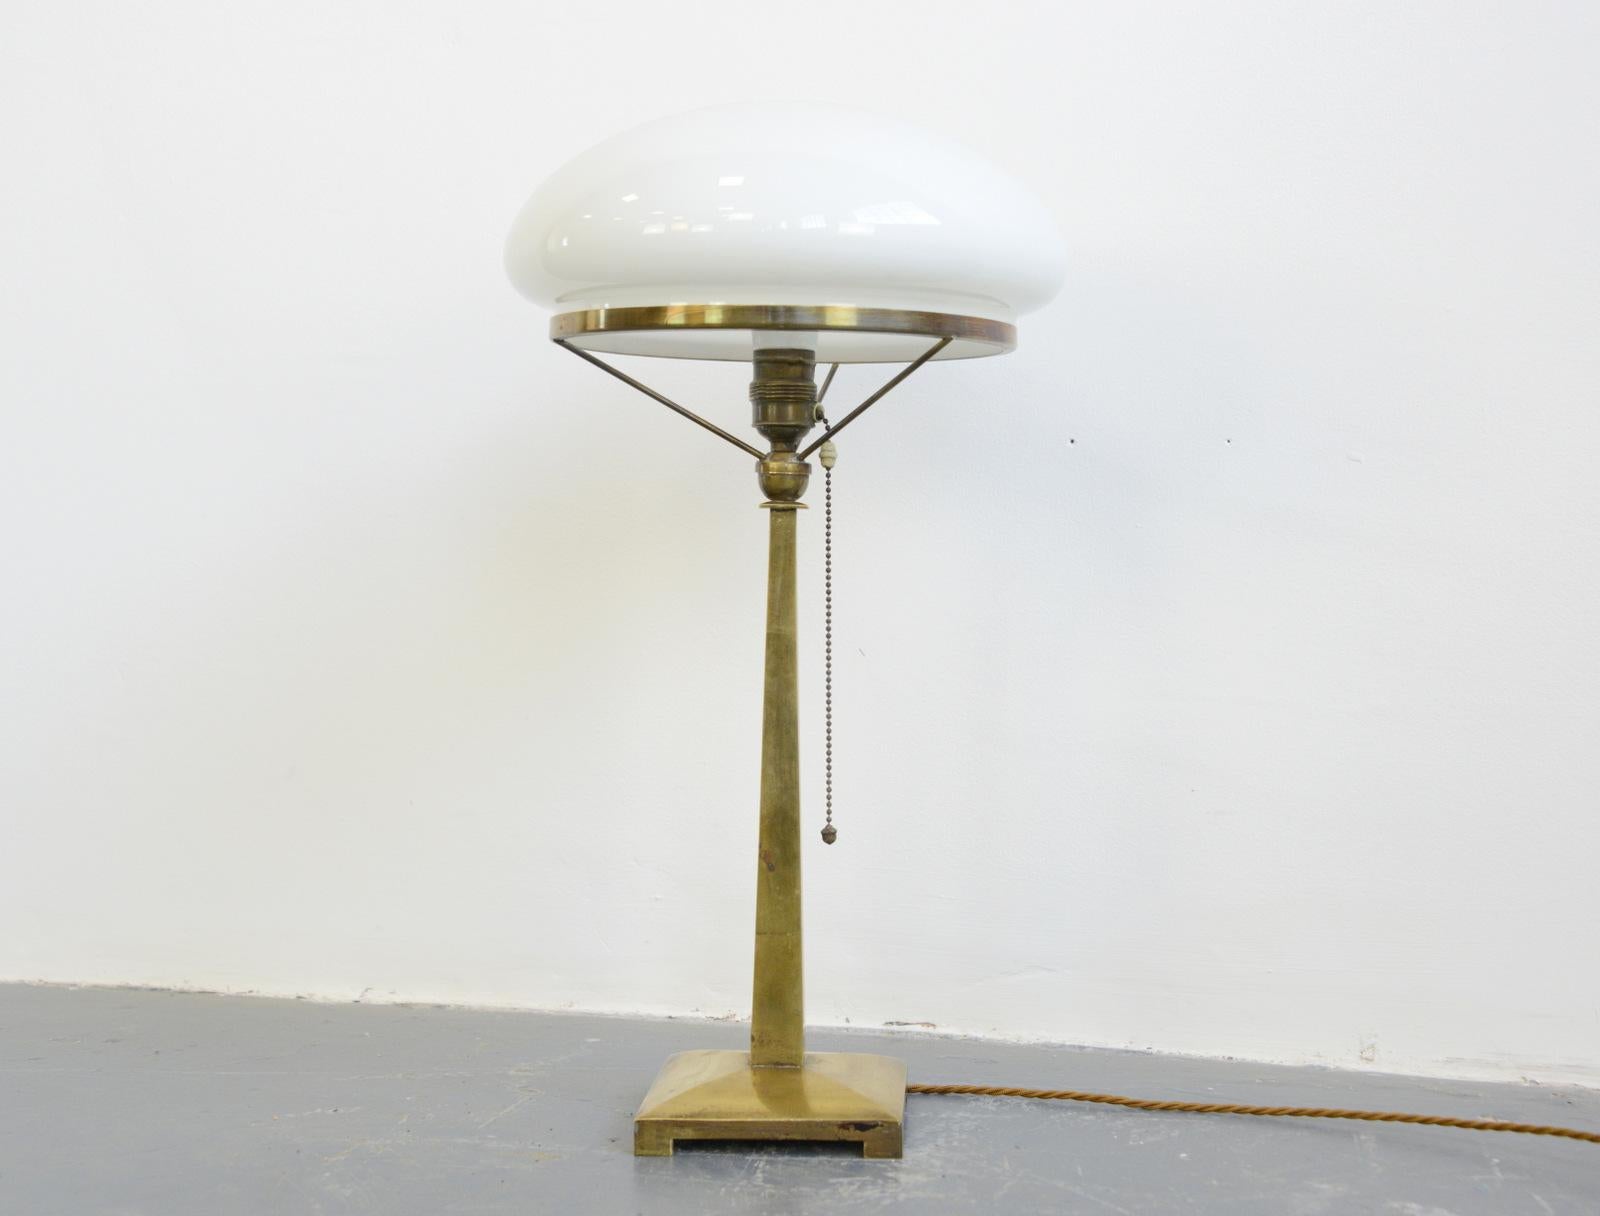 Danish Art Nouveau table lamp, circa 1910

- Opaline glass shade
- Brass base
- Original bulb holder and pull cord
- Takes E27 fitting bulbs
- Danish, 1910
- Measures: 58 cm tall x 30 cm wide x 30 cm deep

Condition report:

Re wired with